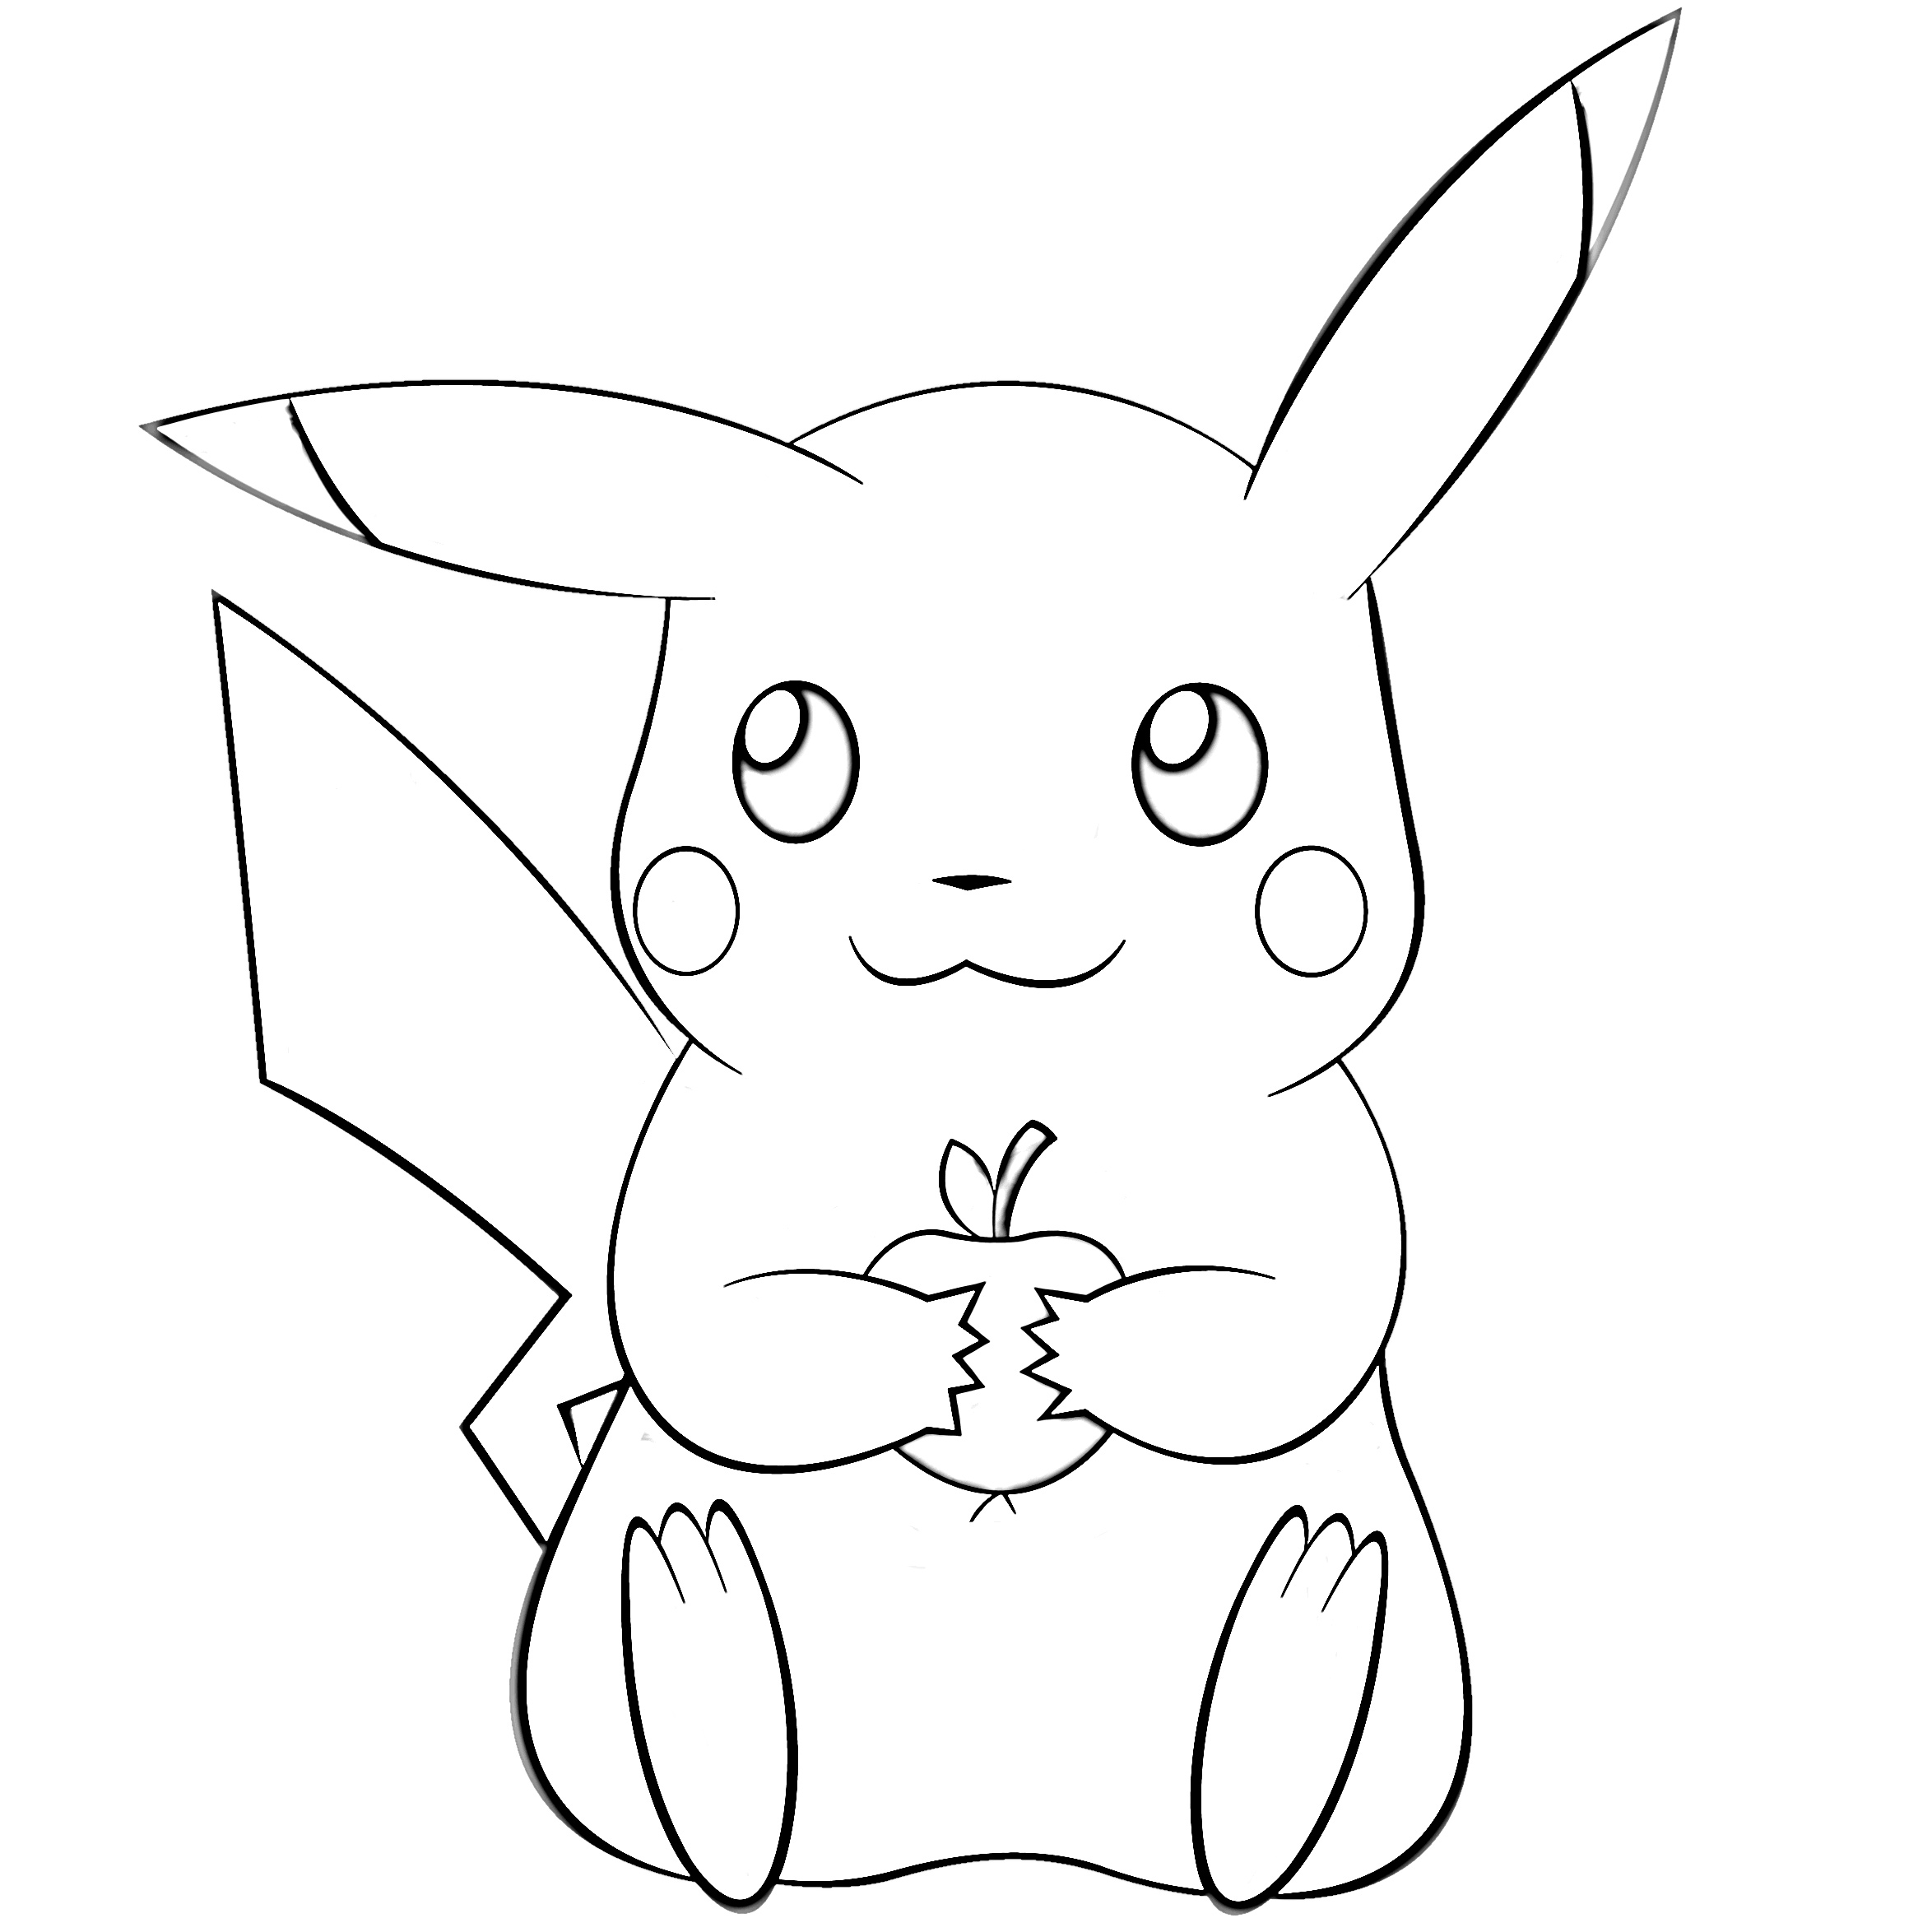 Pikachu eating apple coloring page